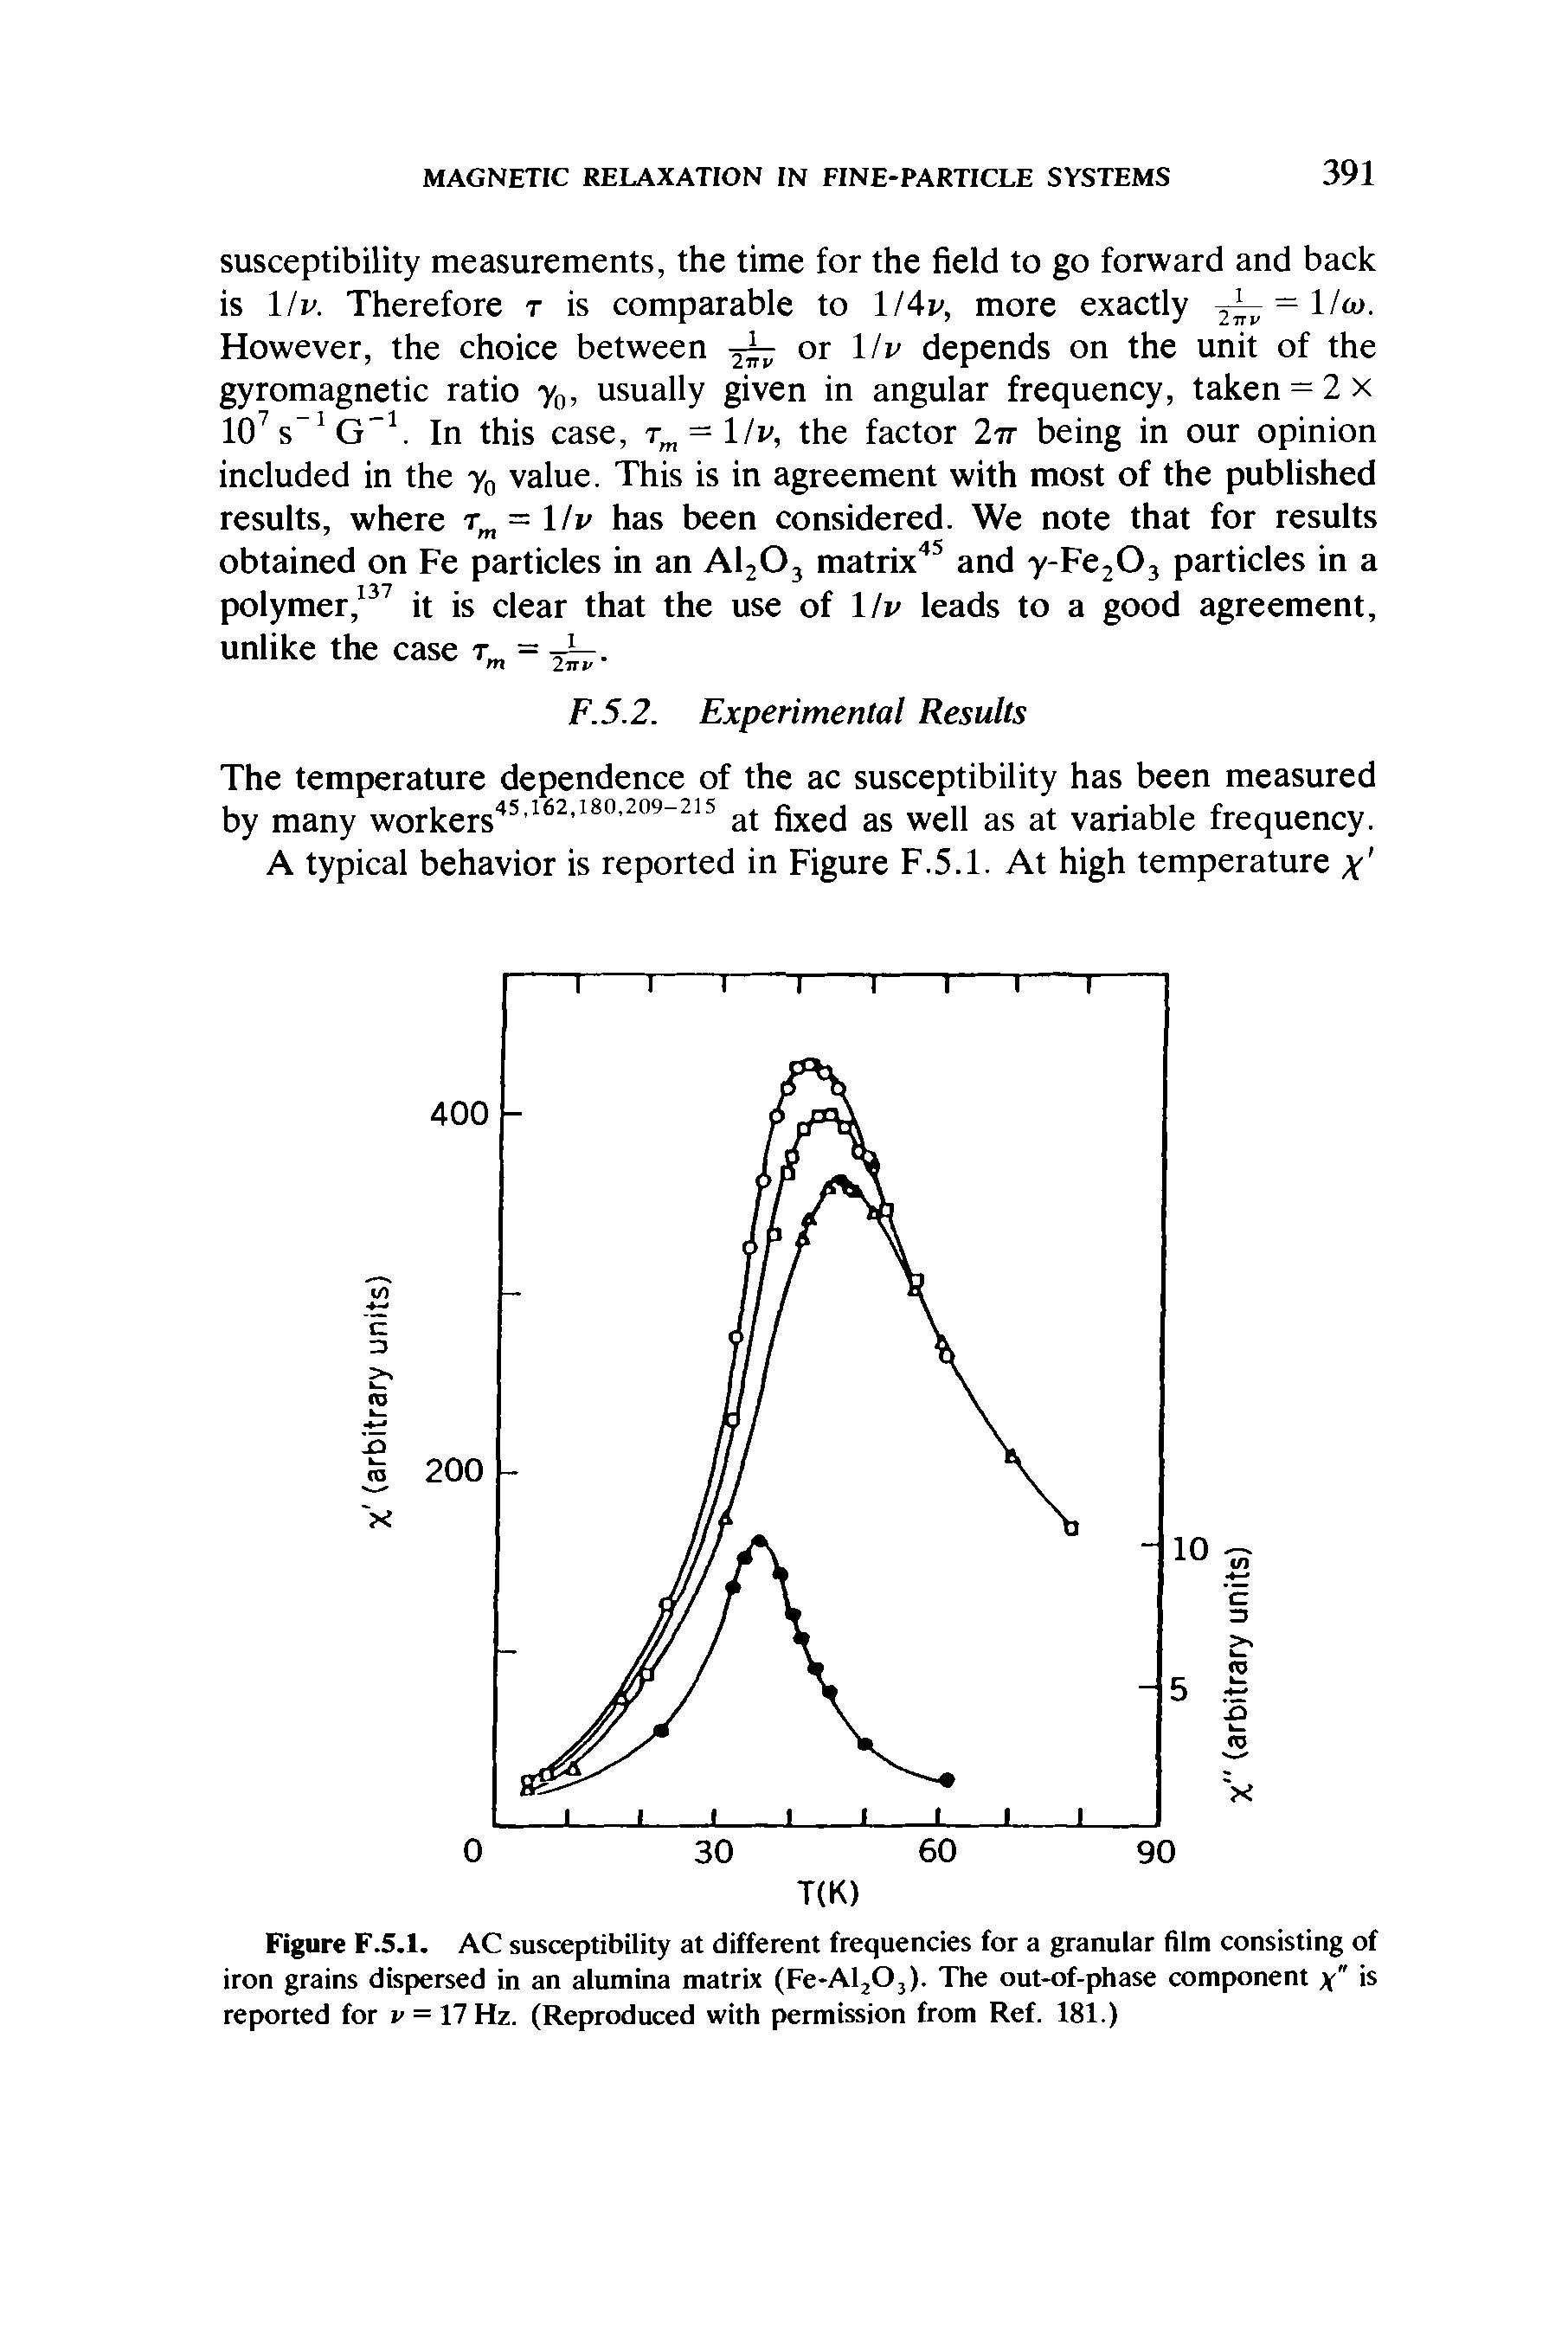 Figure F.5.1. AC susceptibility at different frequencies for a granular film consisting of iron grains dispersed in an alumina matrix (Fe-Al Oj). The out-of-phase component x" is reported for v = l Hz. (Reproduced with permission from Ref. 181.)...